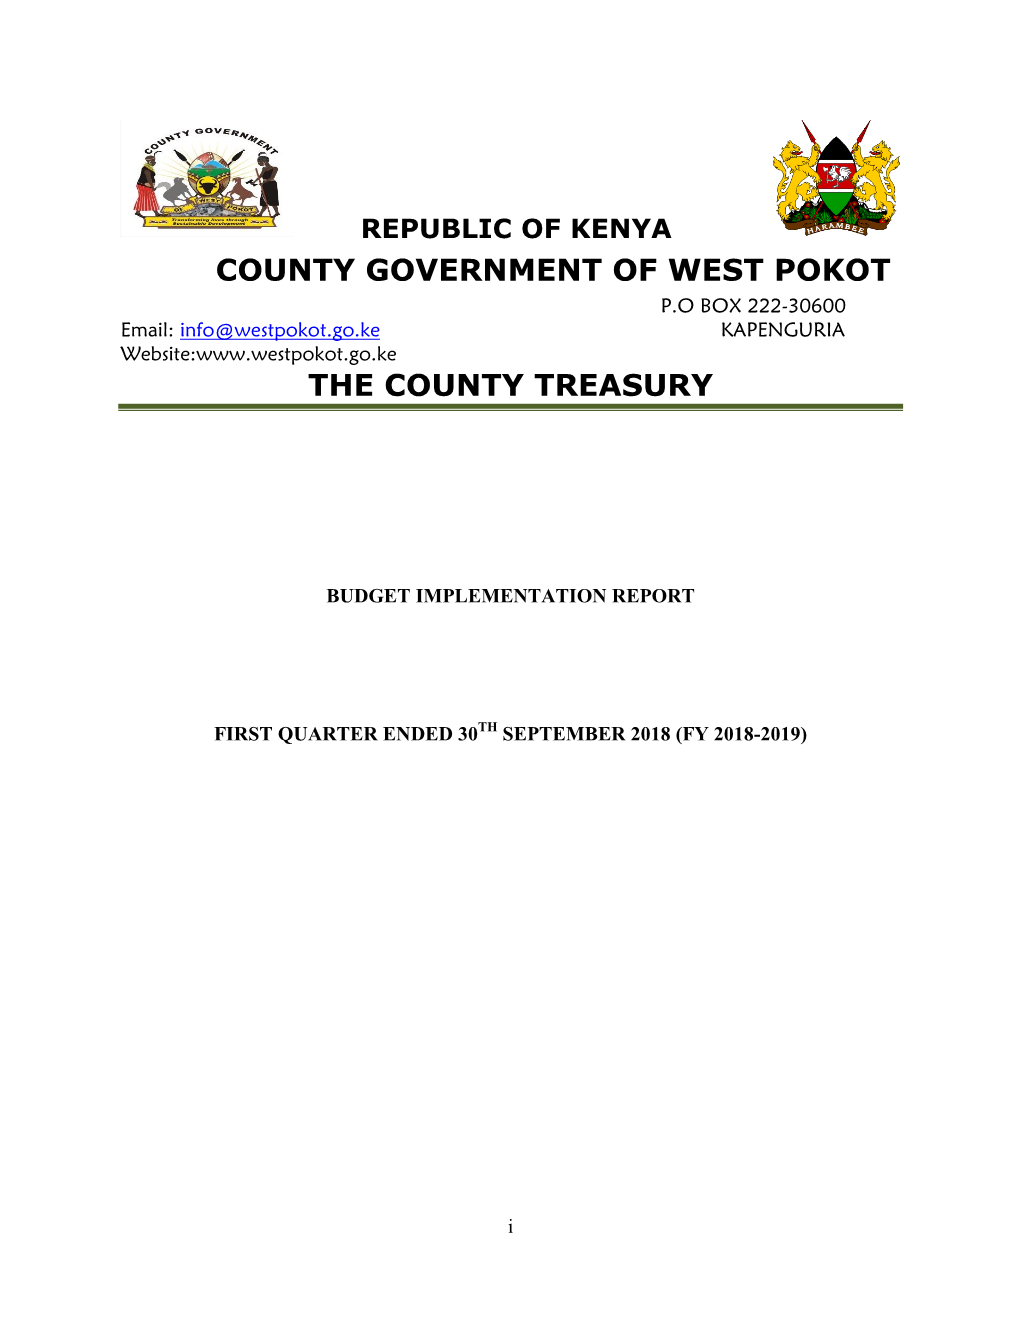 County Government of West Pokot the County Treasury